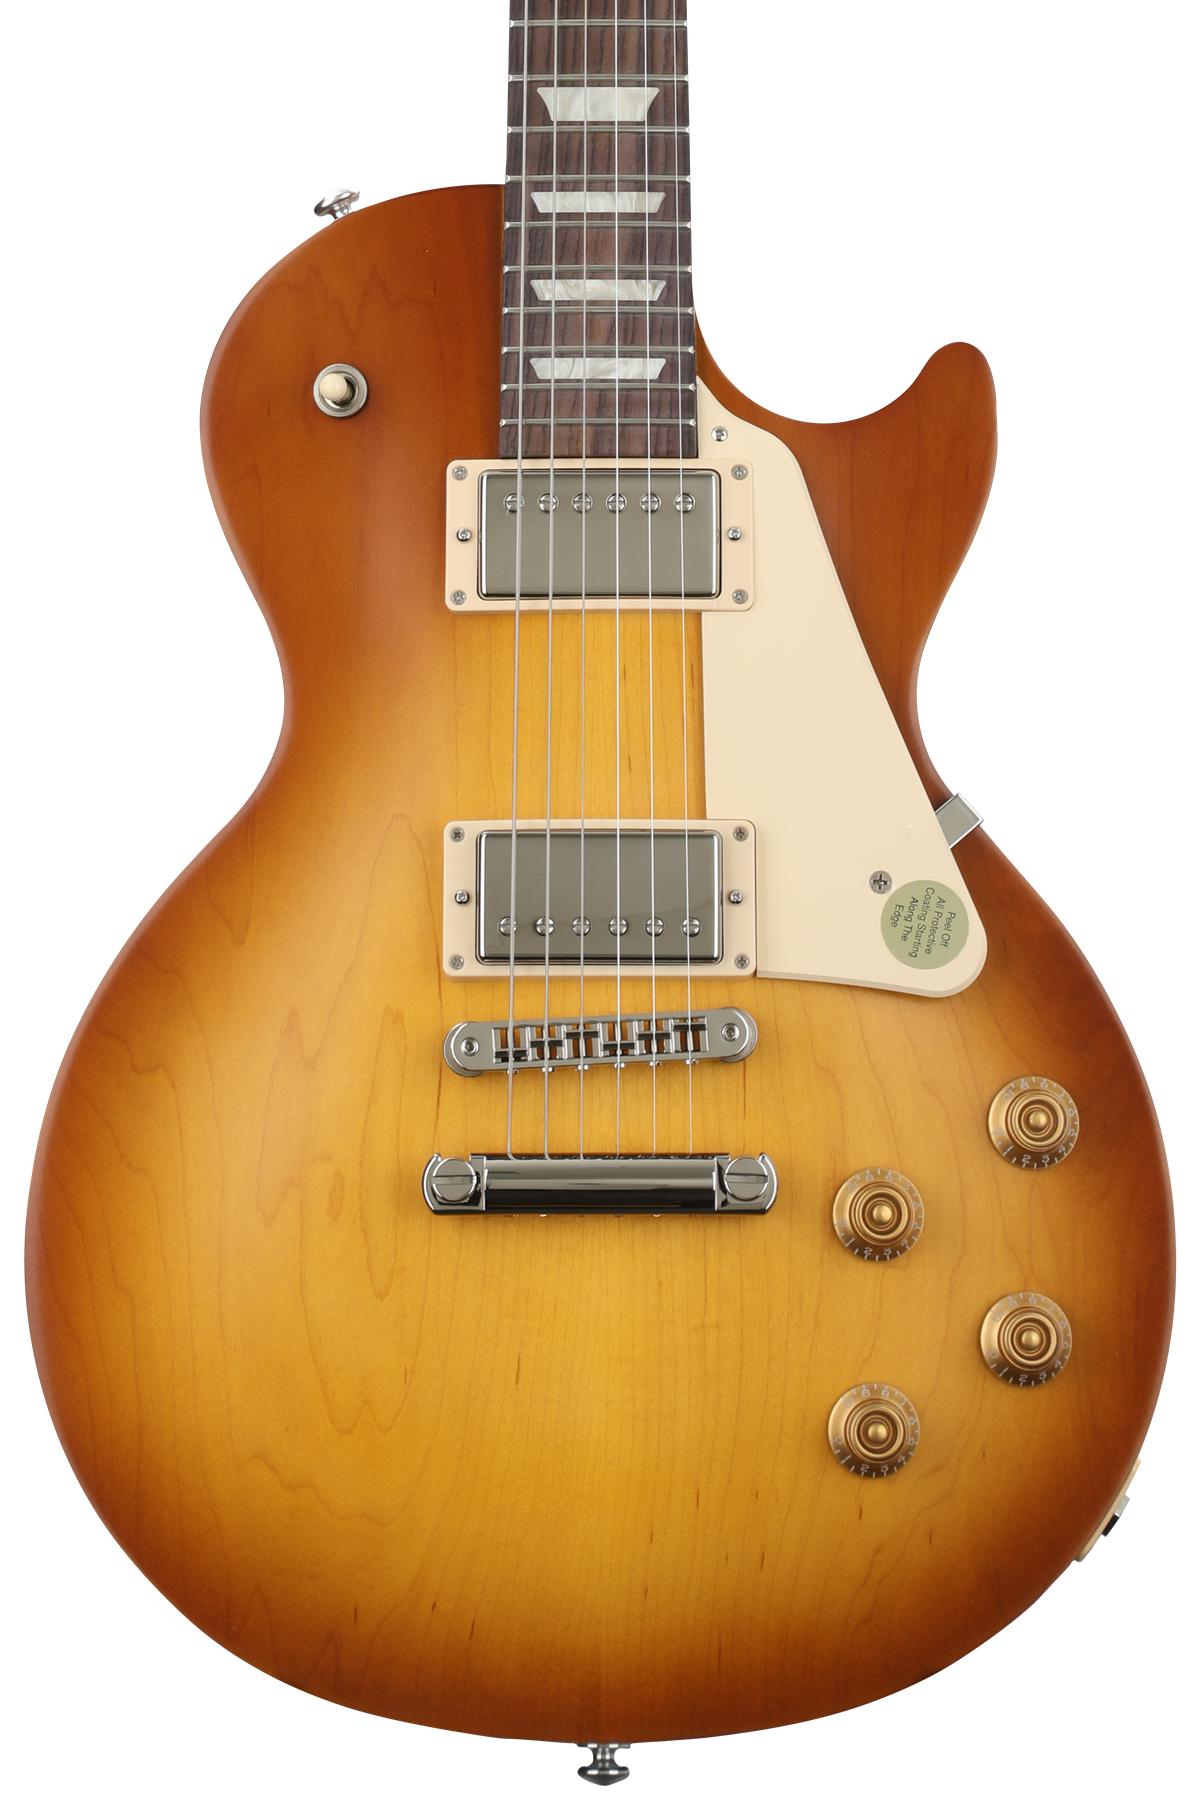 Gibson Les Paul Tribute - Satin Honeyburst | Sweetwater